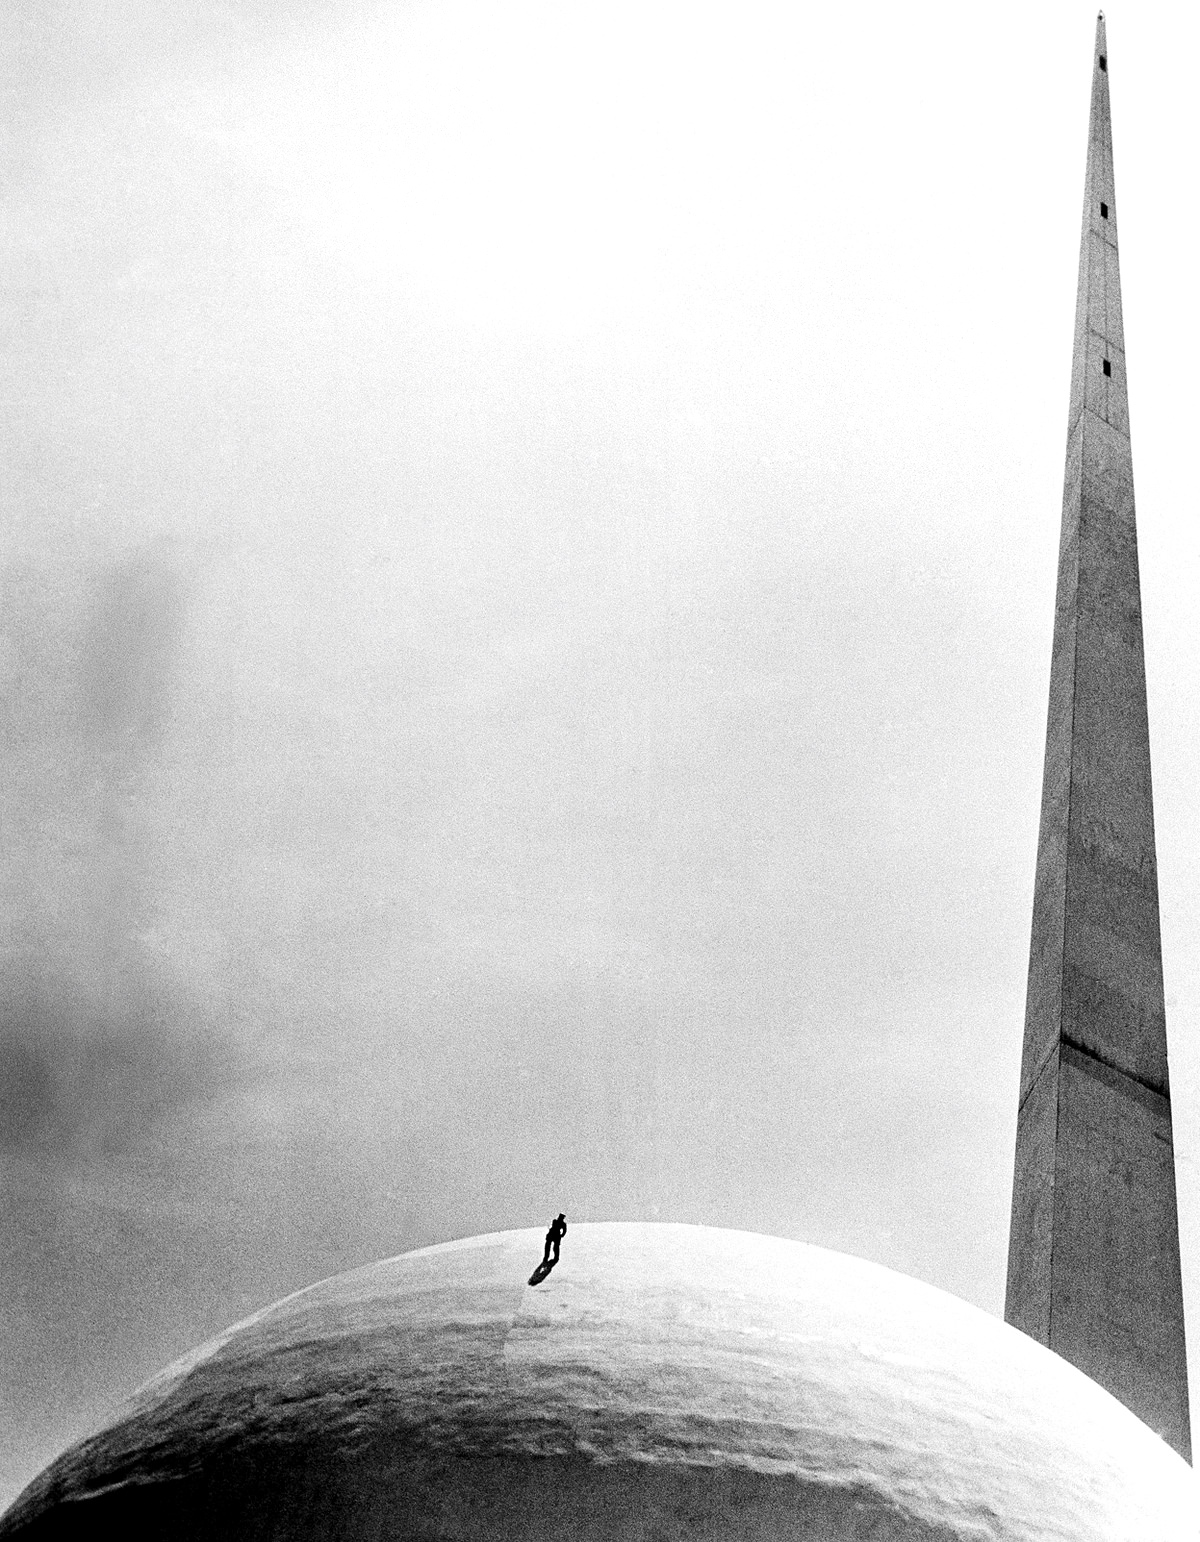 A workman at New York World's Fair repaints the famed Perisphere, on June 6, 1939.